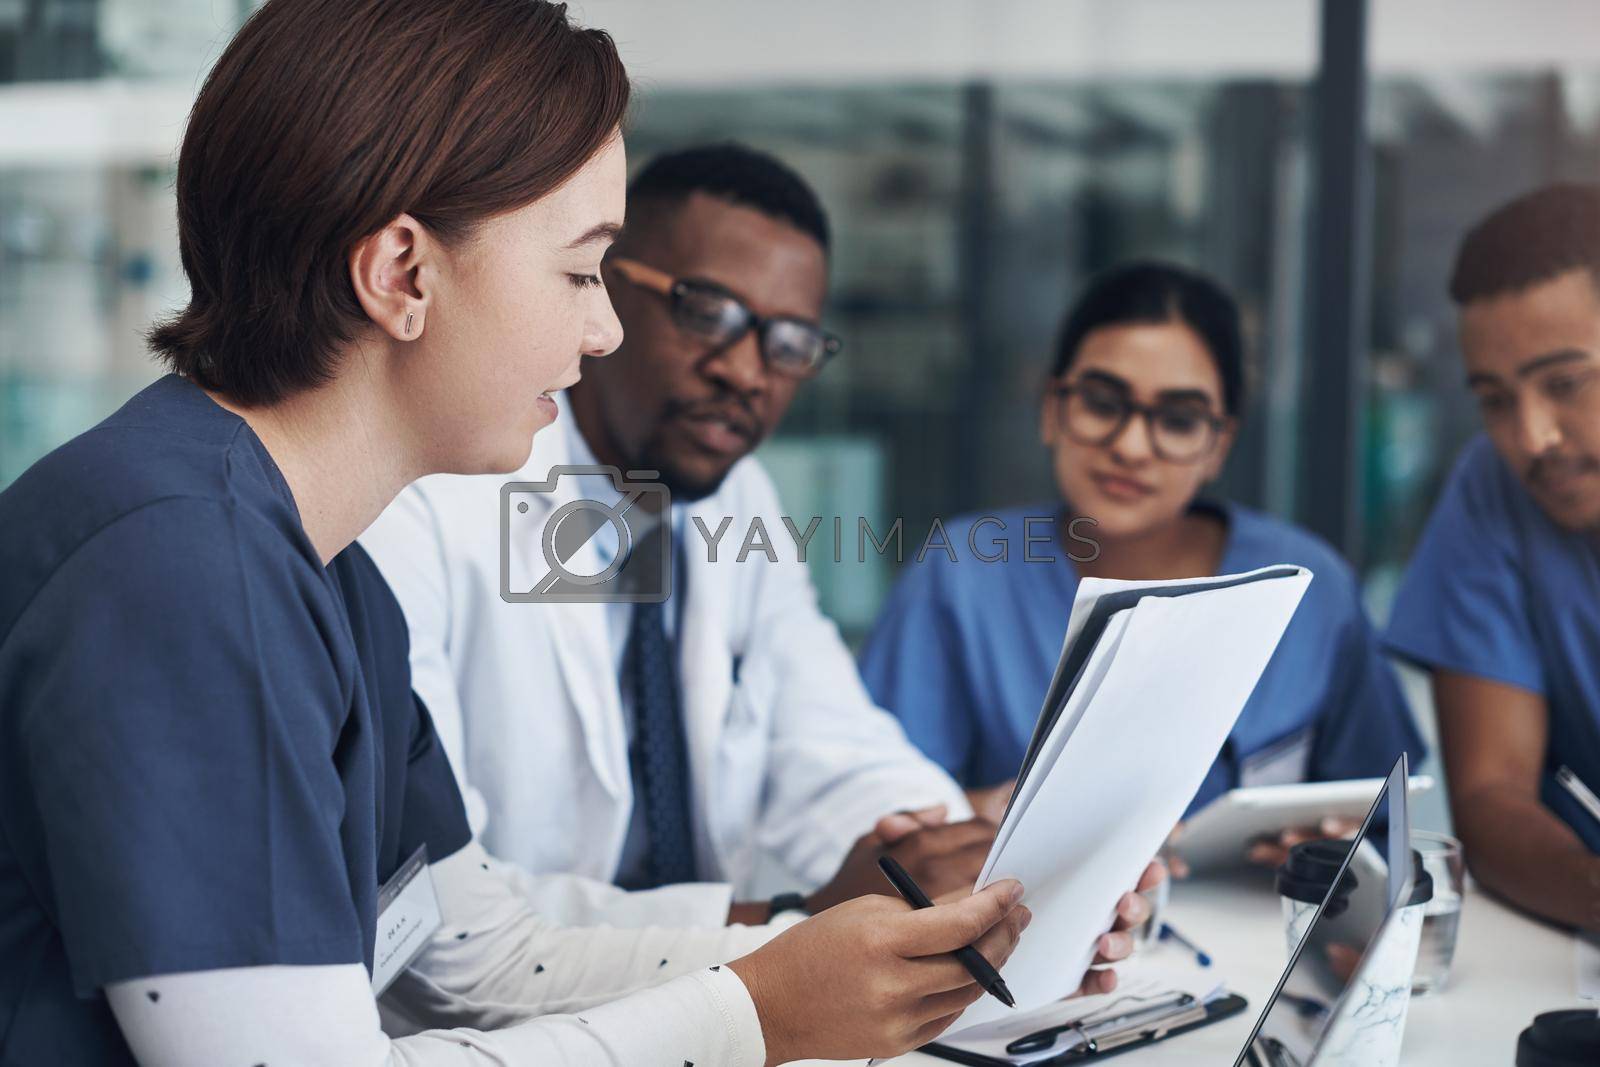 Royalty free image of Implement those changes and we can see. Shot of a group of nurses and doctors having a meeting together. by YuriArcurs